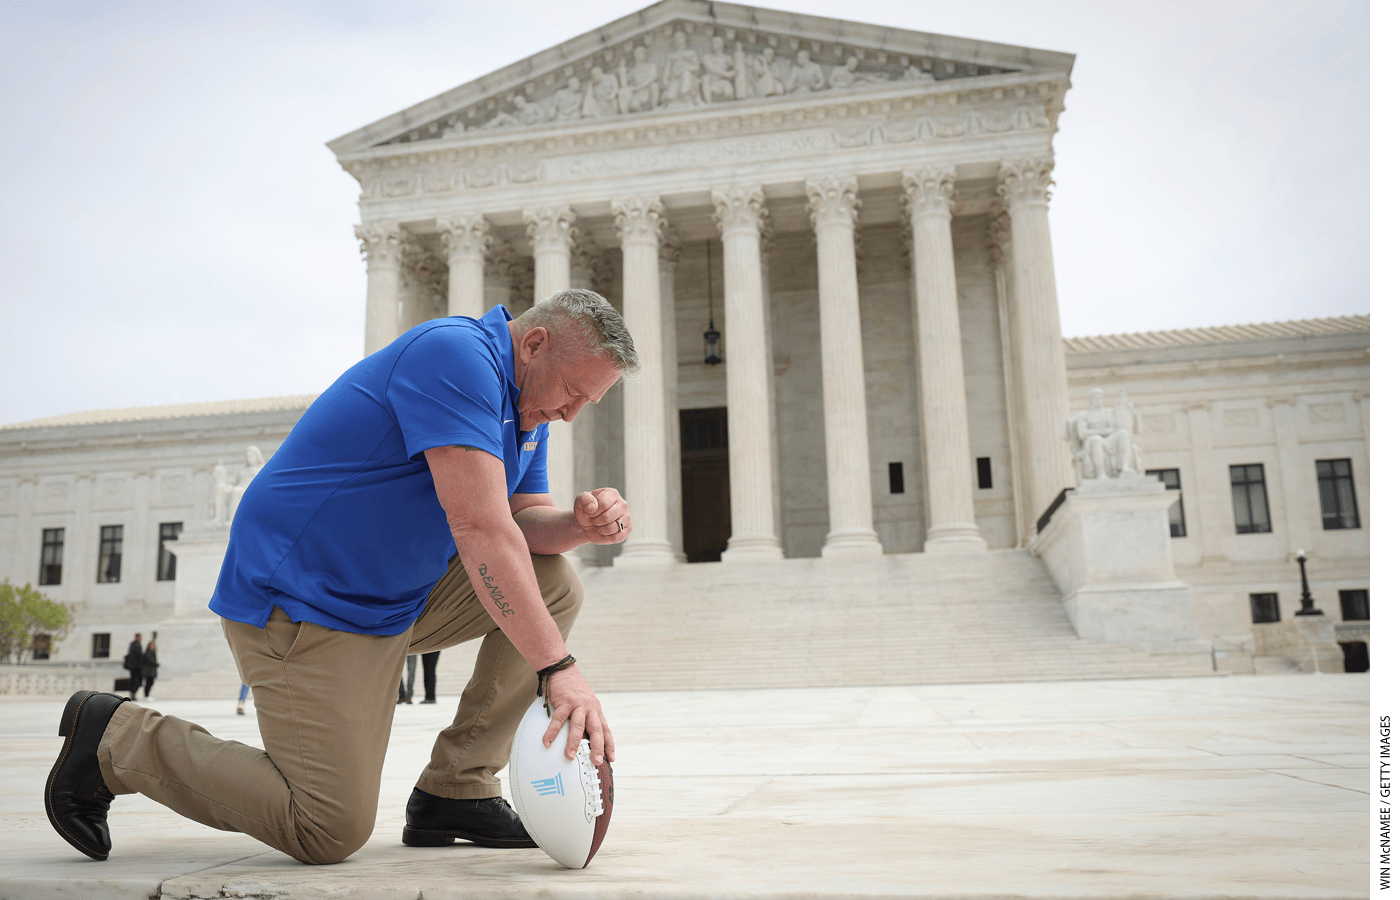 Former Bremerton High School assistant football coach Joe Kennedy takes a knee in front of the U.S. Supreme Court after his legal case, Kennedy vs. Bremerton School District, was argued before the court on April 25, 2022 in Washington, DC.